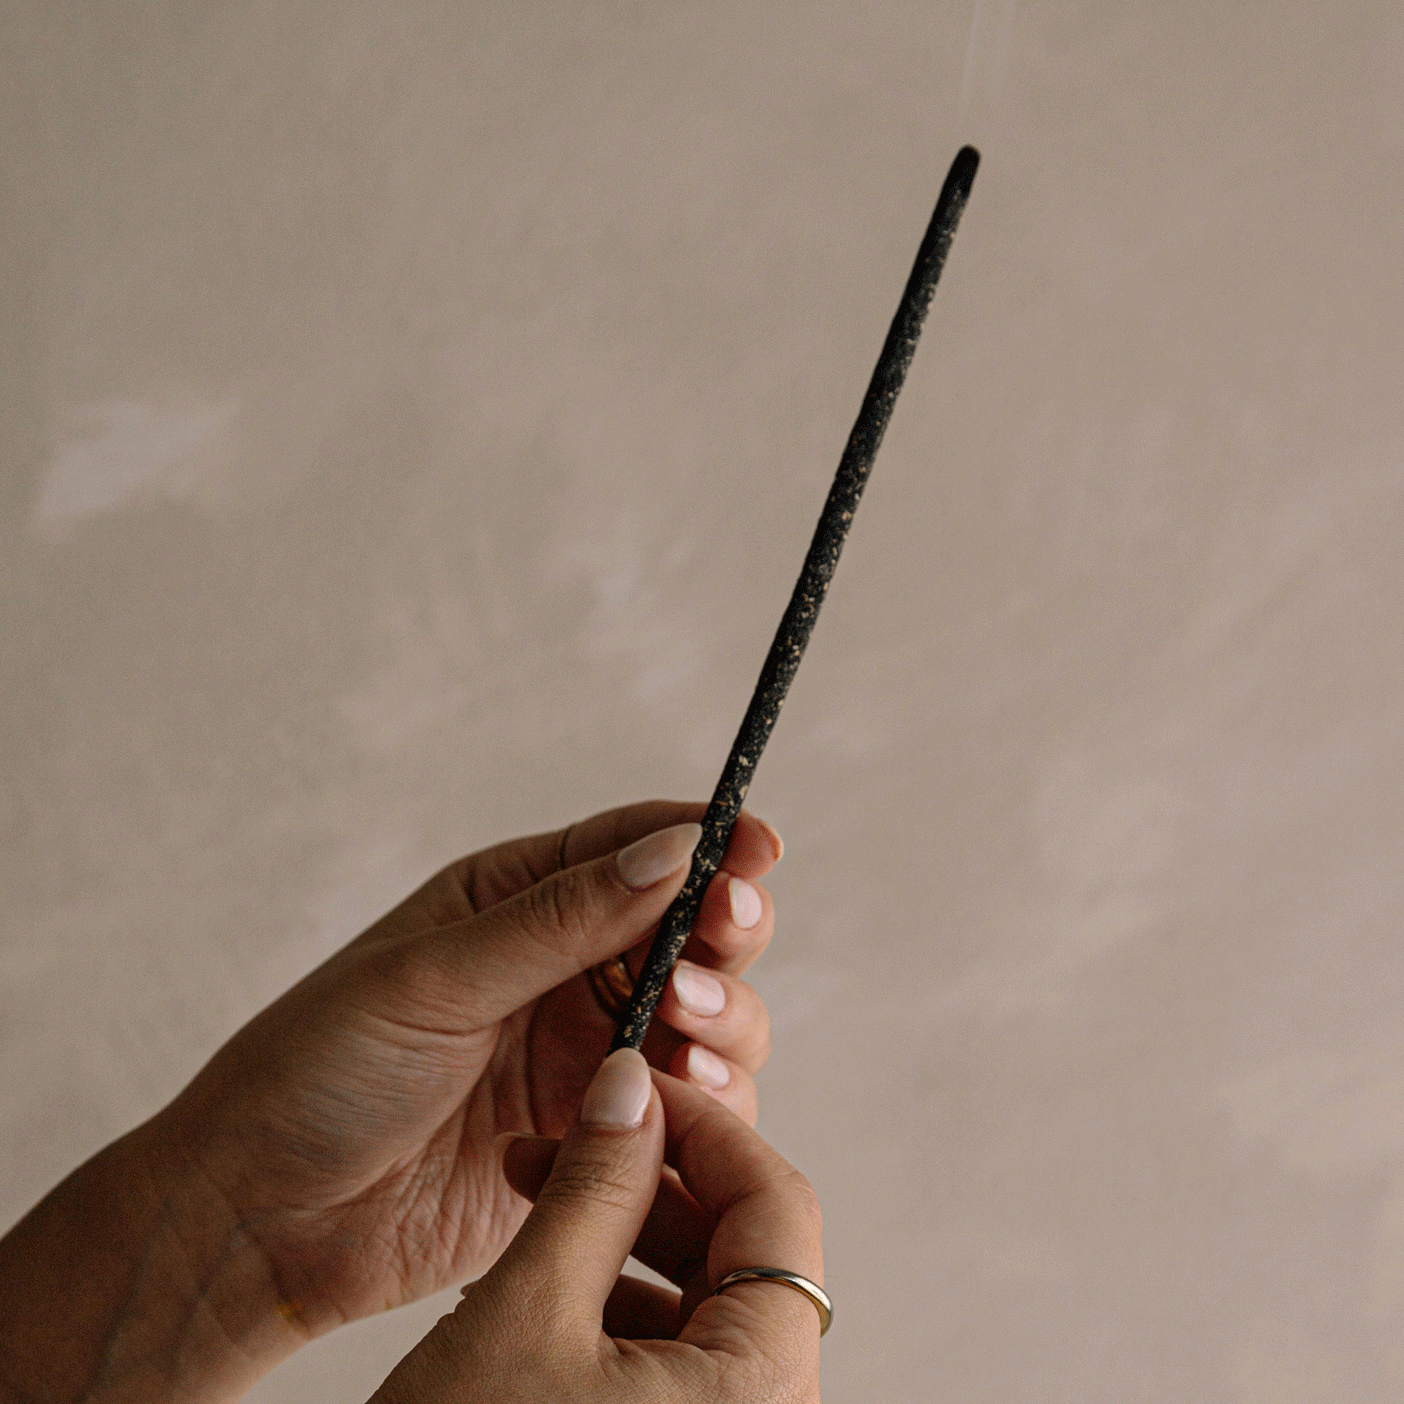 A gif holding and burning incense stick.